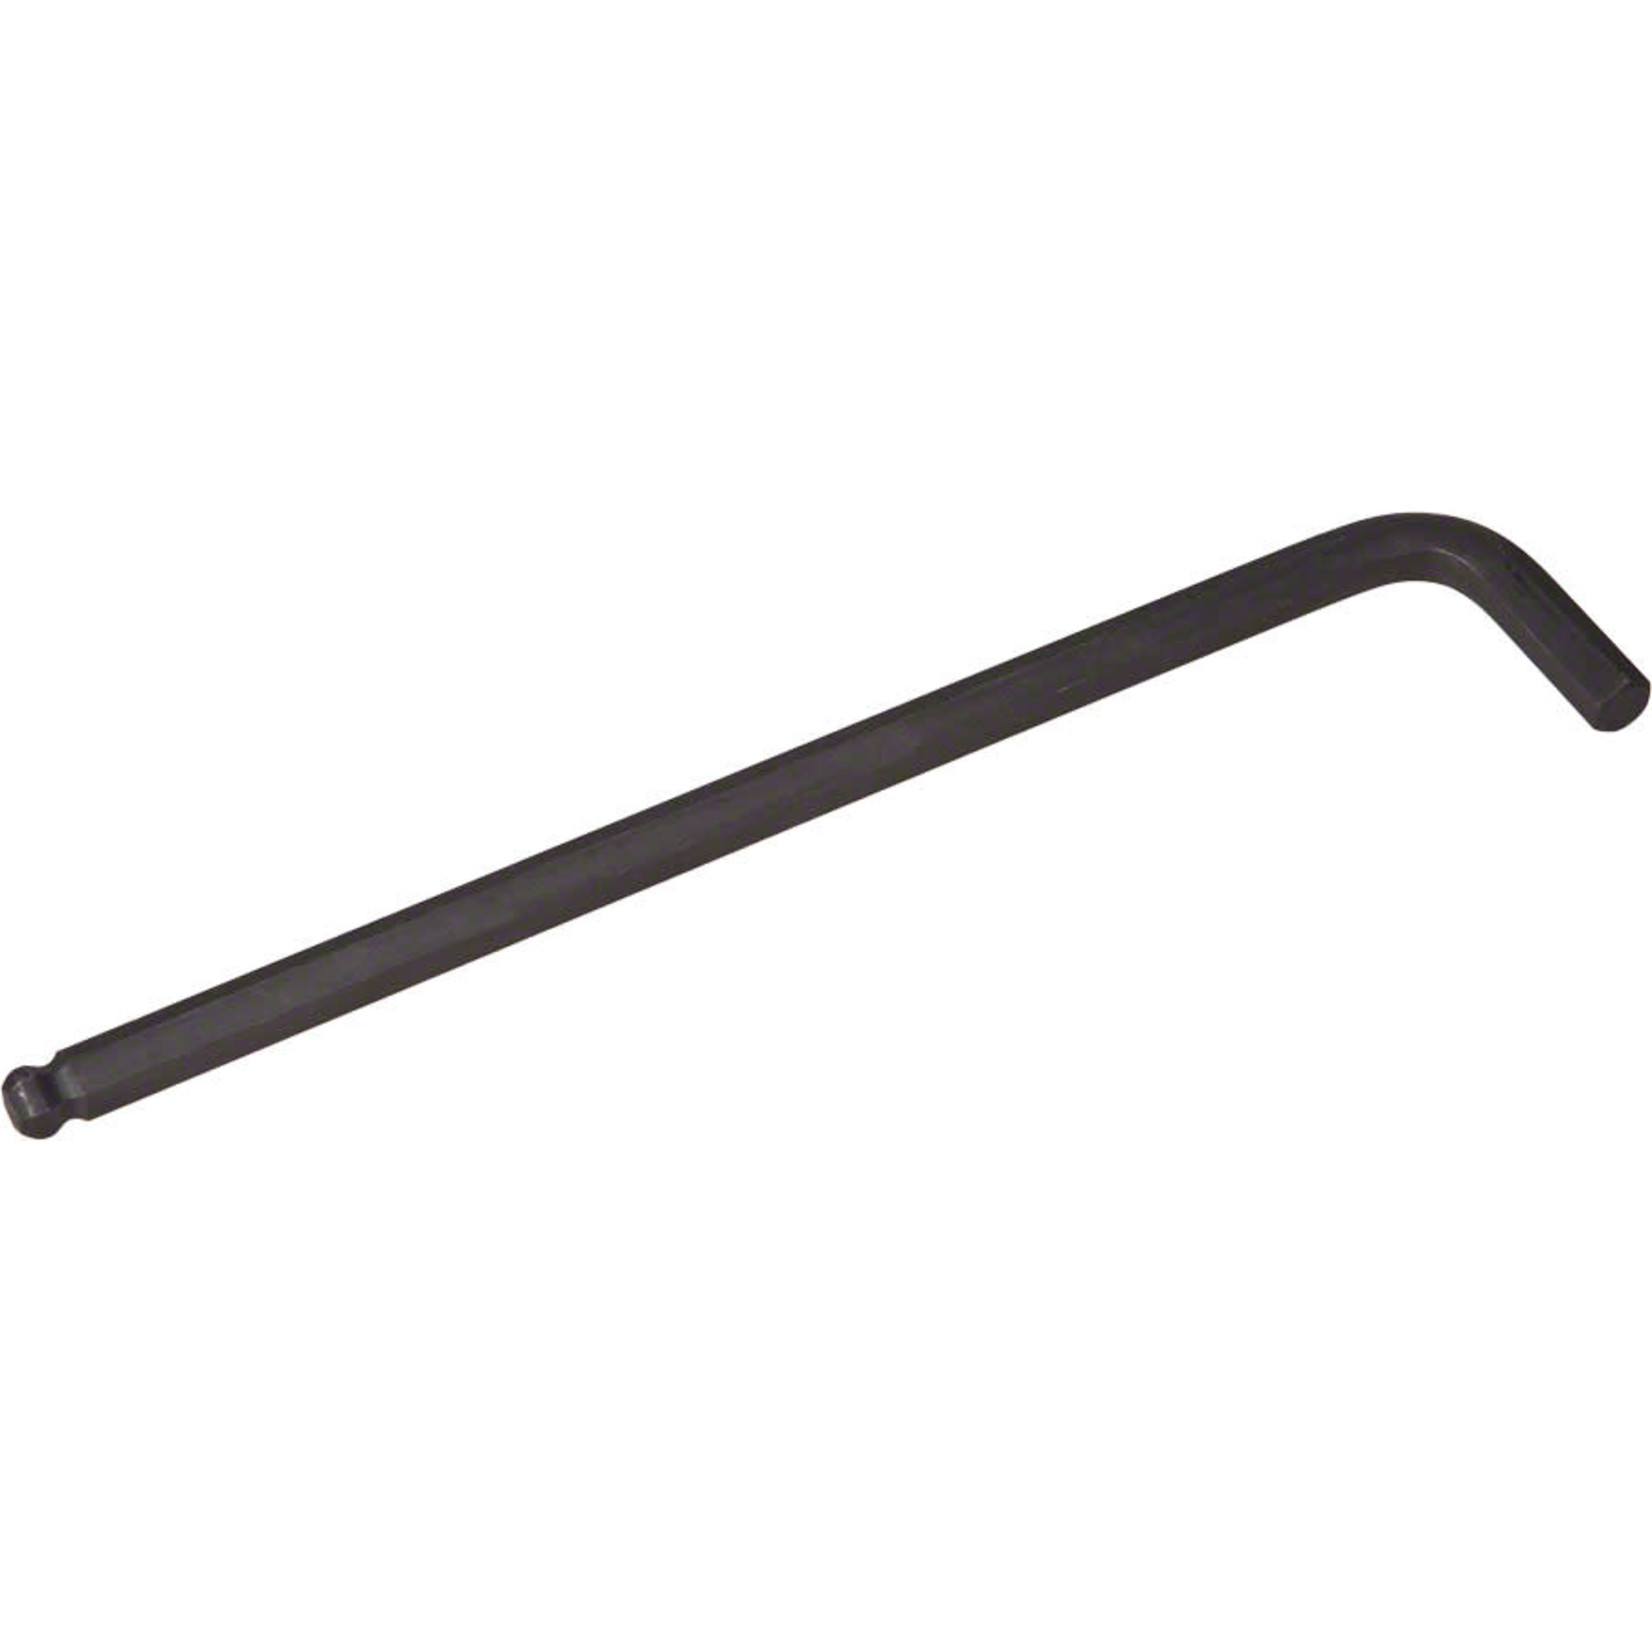 Park Tool Park Tool HR-8C, 8mm Hex Wrench for Installing and Removing 8mm Crank Bolts